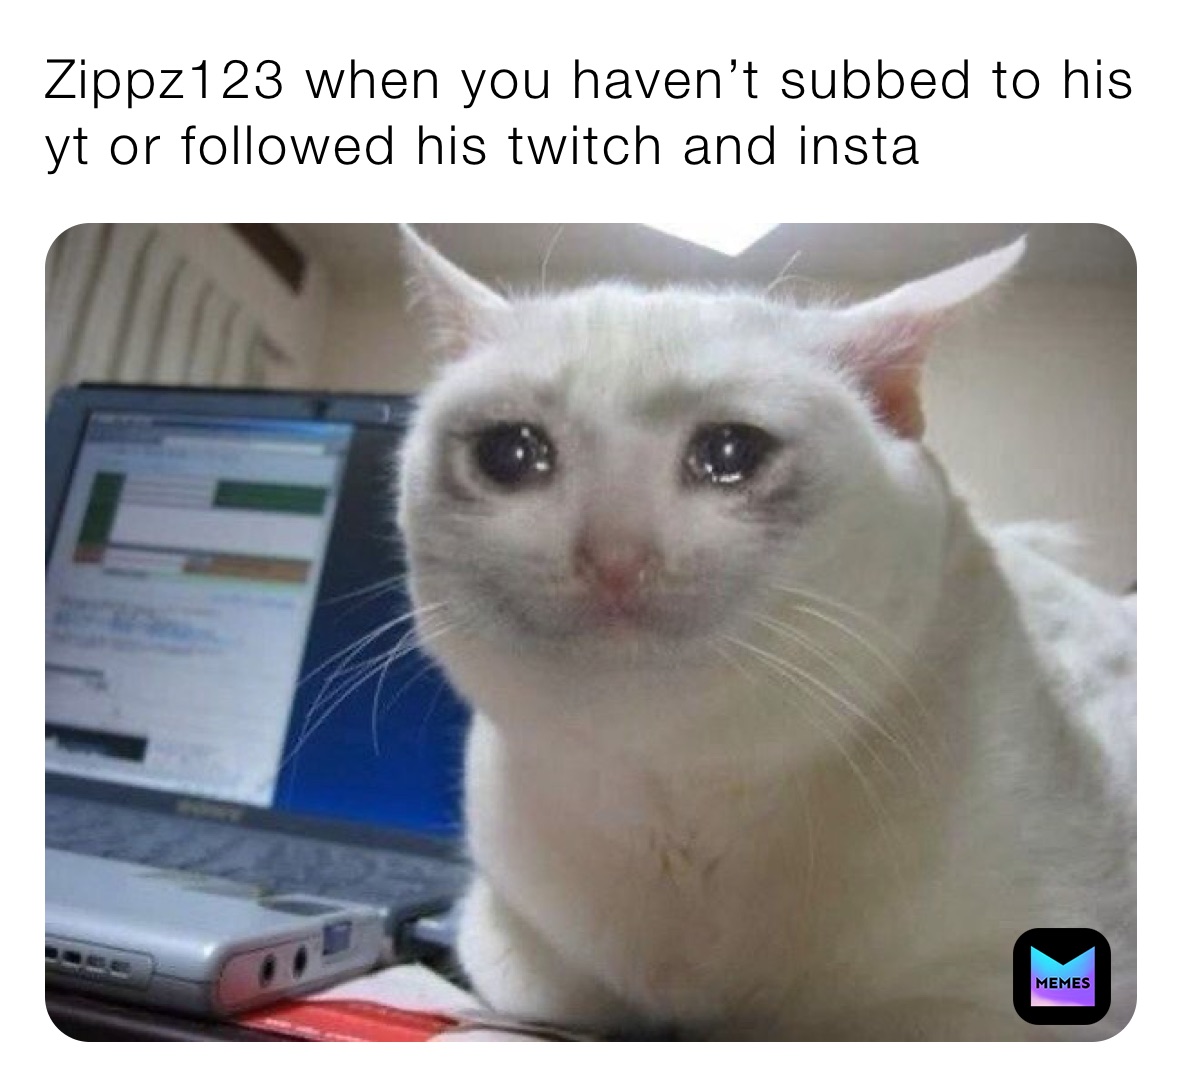 Zippz123 when you haven’t subbed to his yt or followed his twitch and insta 